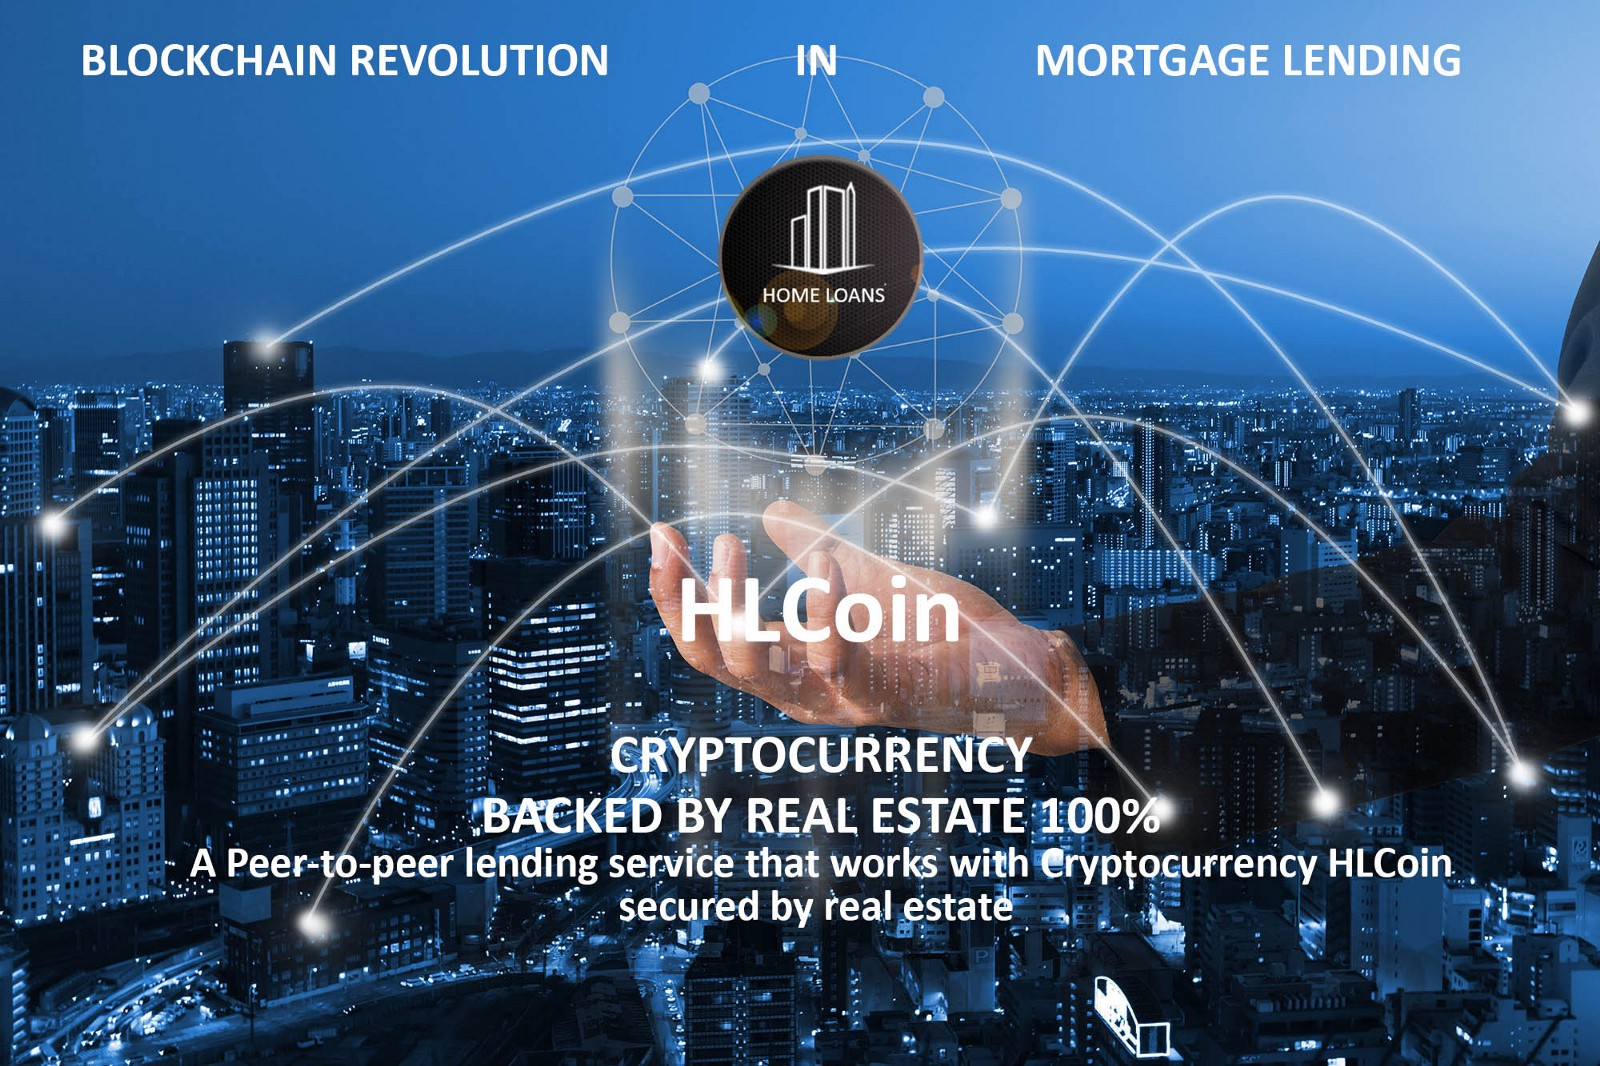 real estate backed cryptocurrency